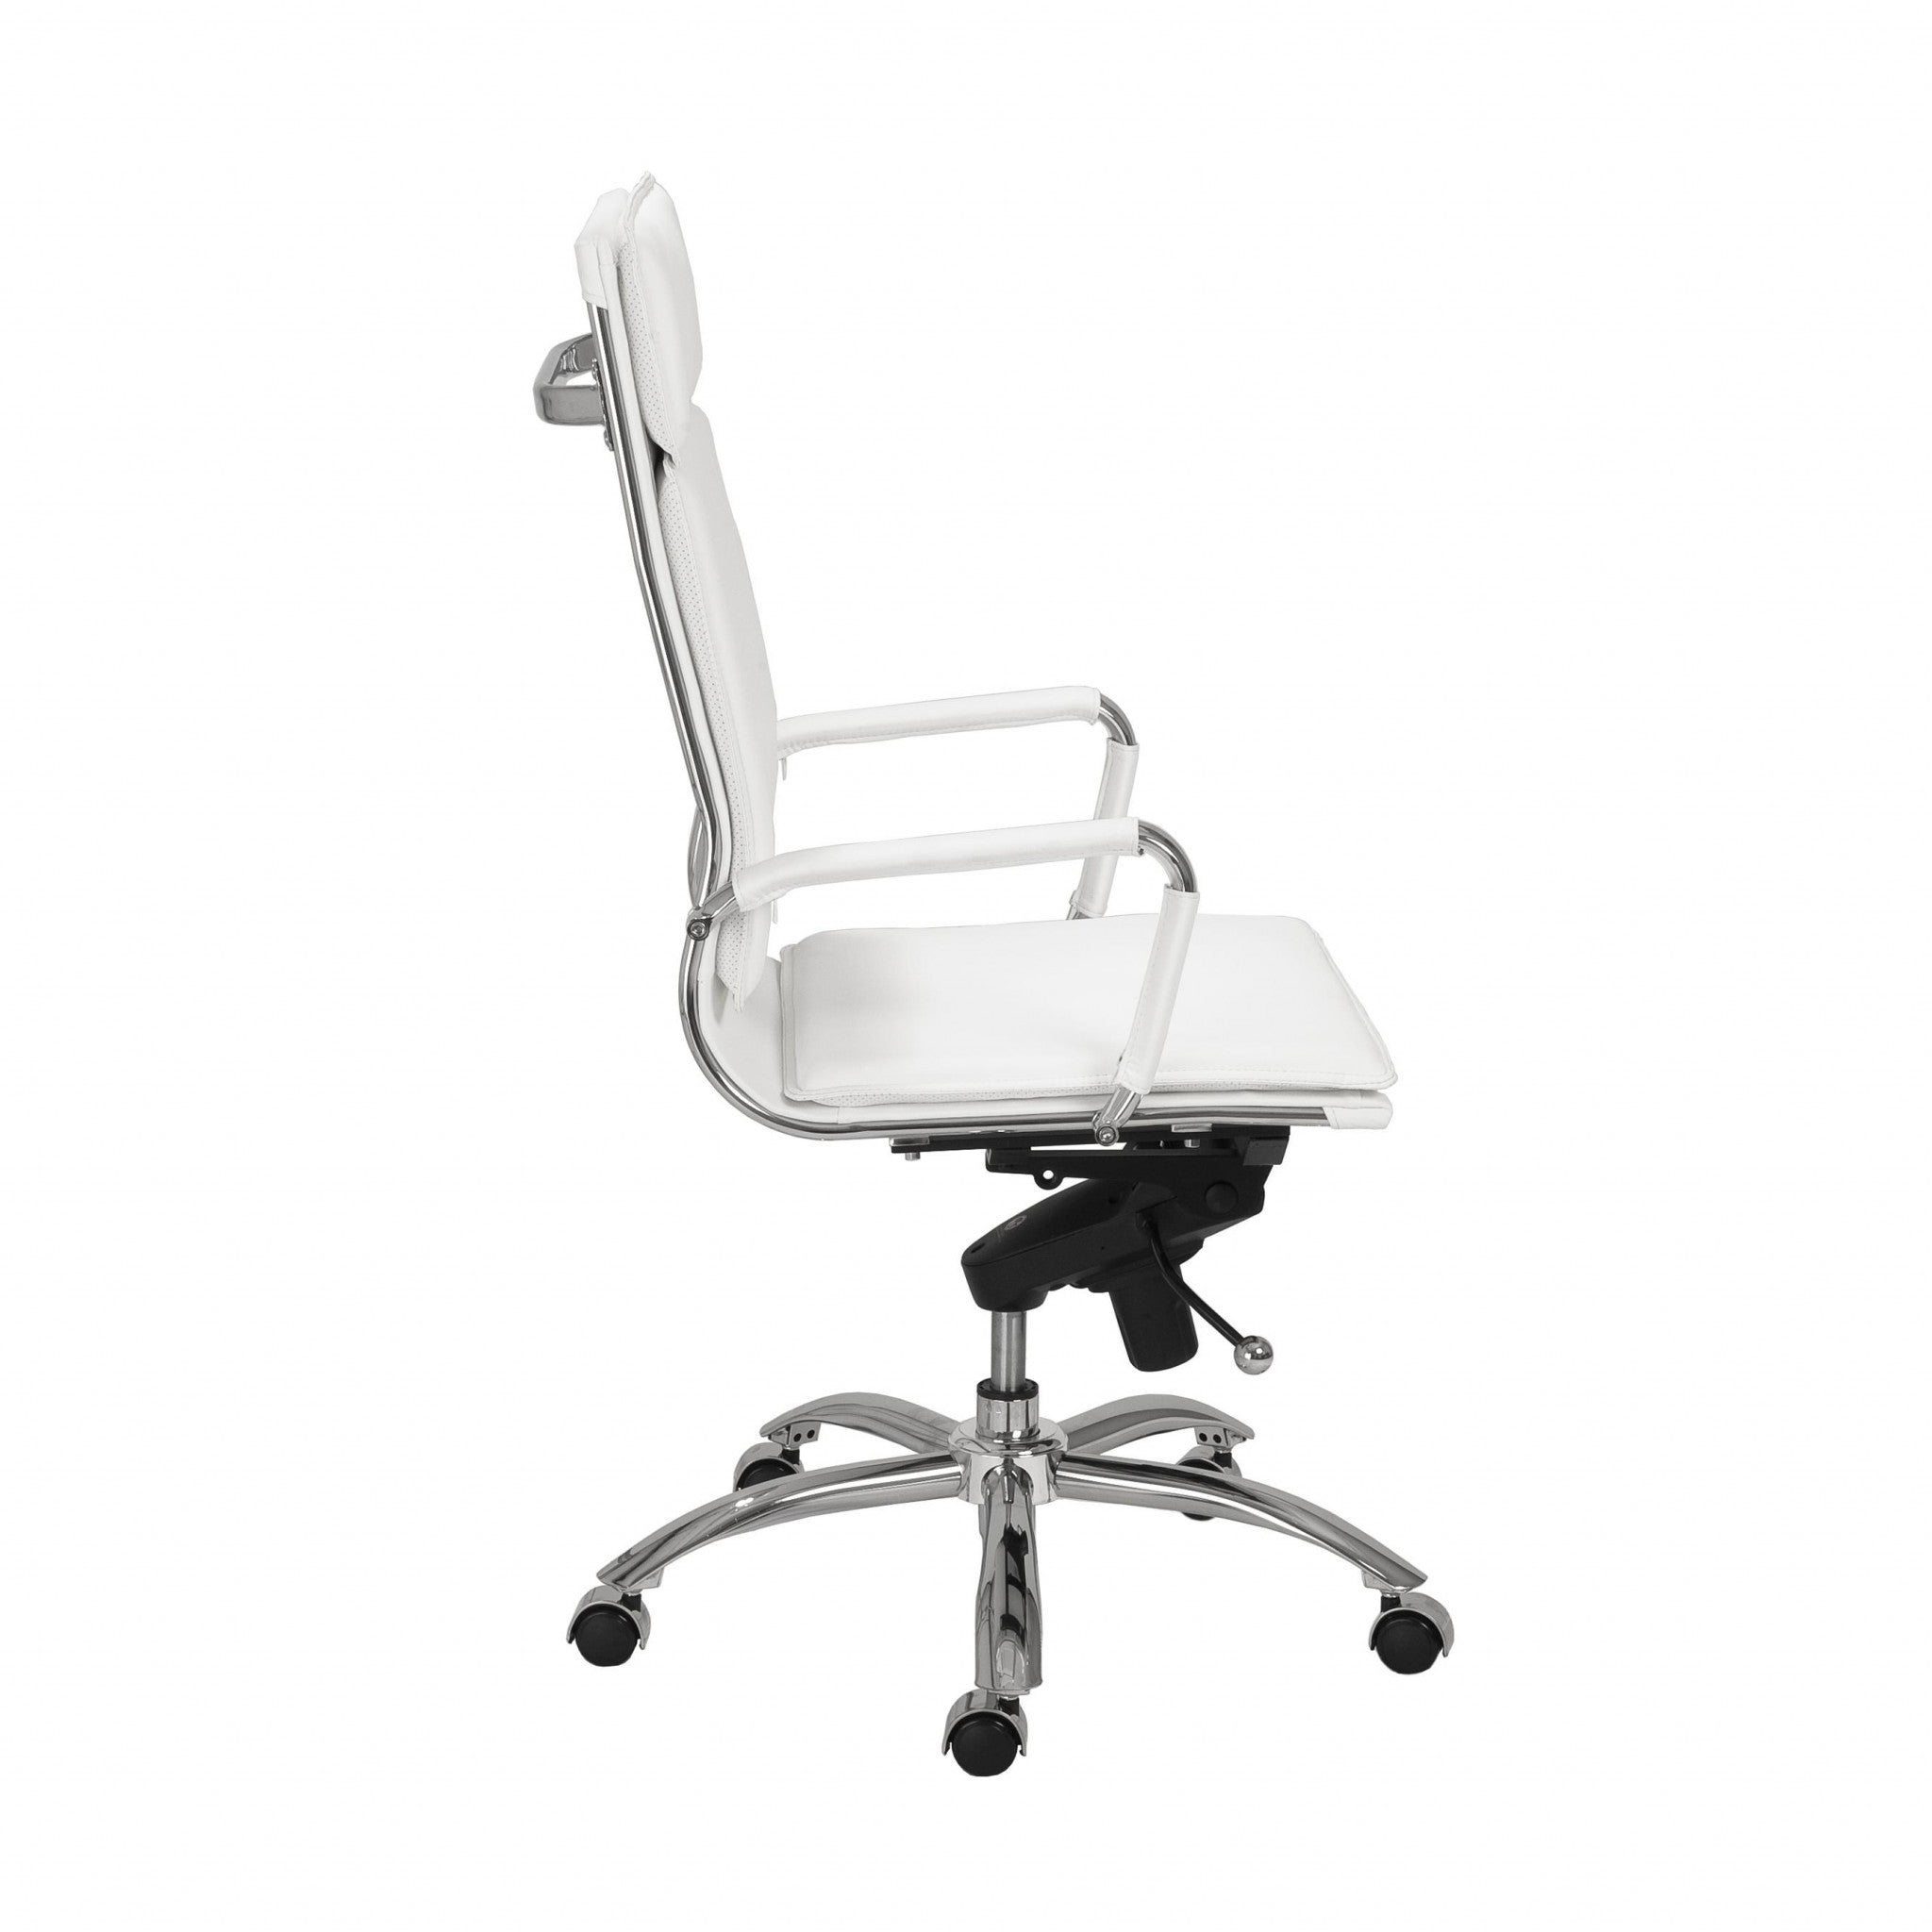 White Faux Leather Seat Swivel Adjustable Task Chair Leather Back Steel Frame